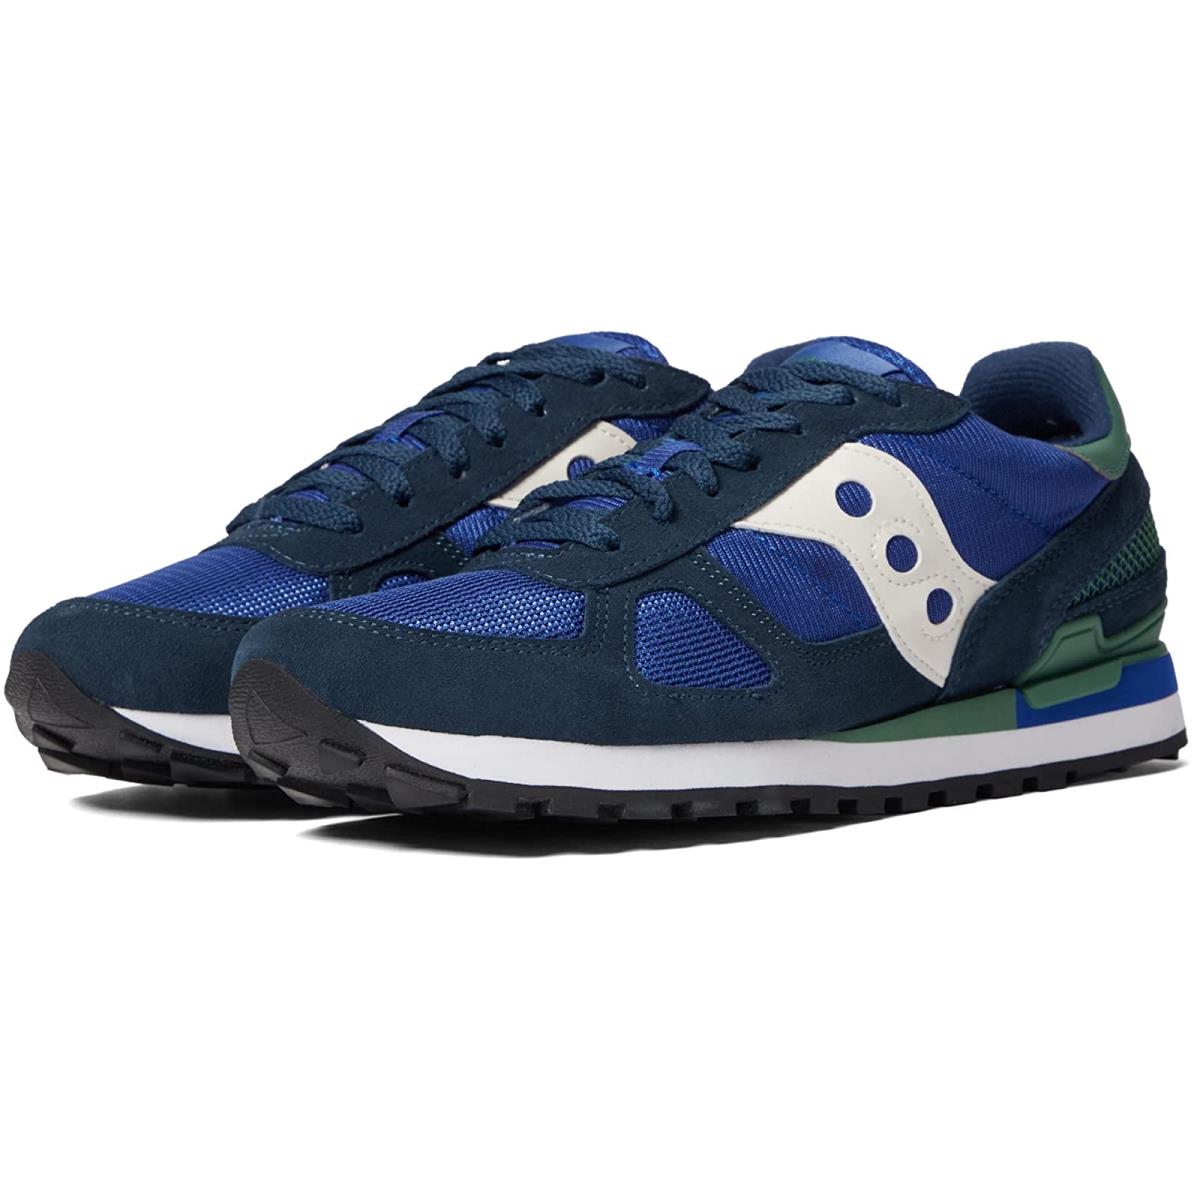 Unisex Sneakers Athletic Shoes Saucony s Shadow Navy/Blue